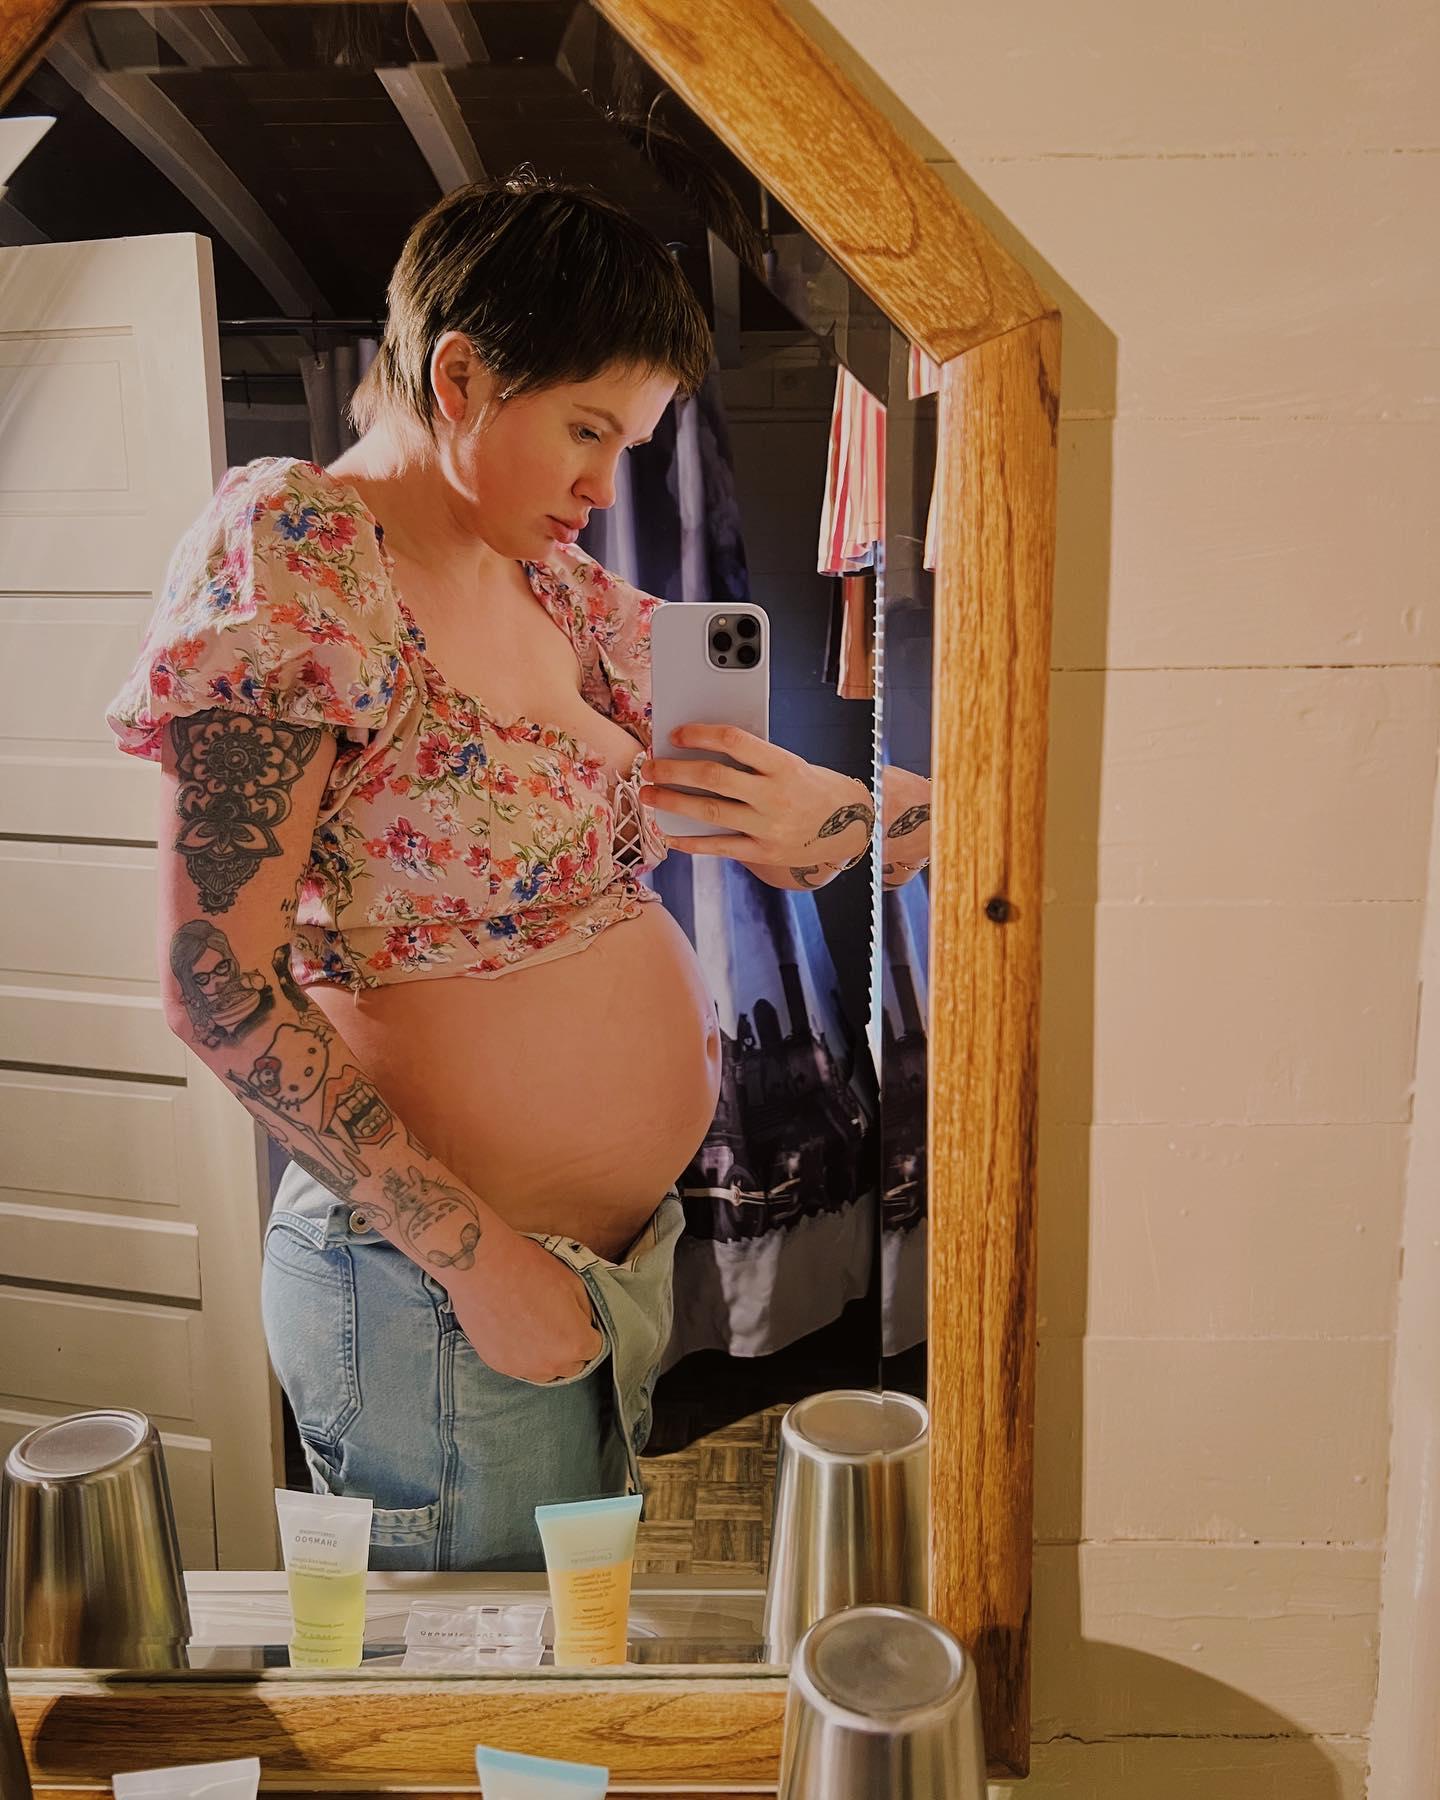 Ireland Baldwin Reveals Her Baby Is As Big As The Hamburger Phone From ‘Juno’